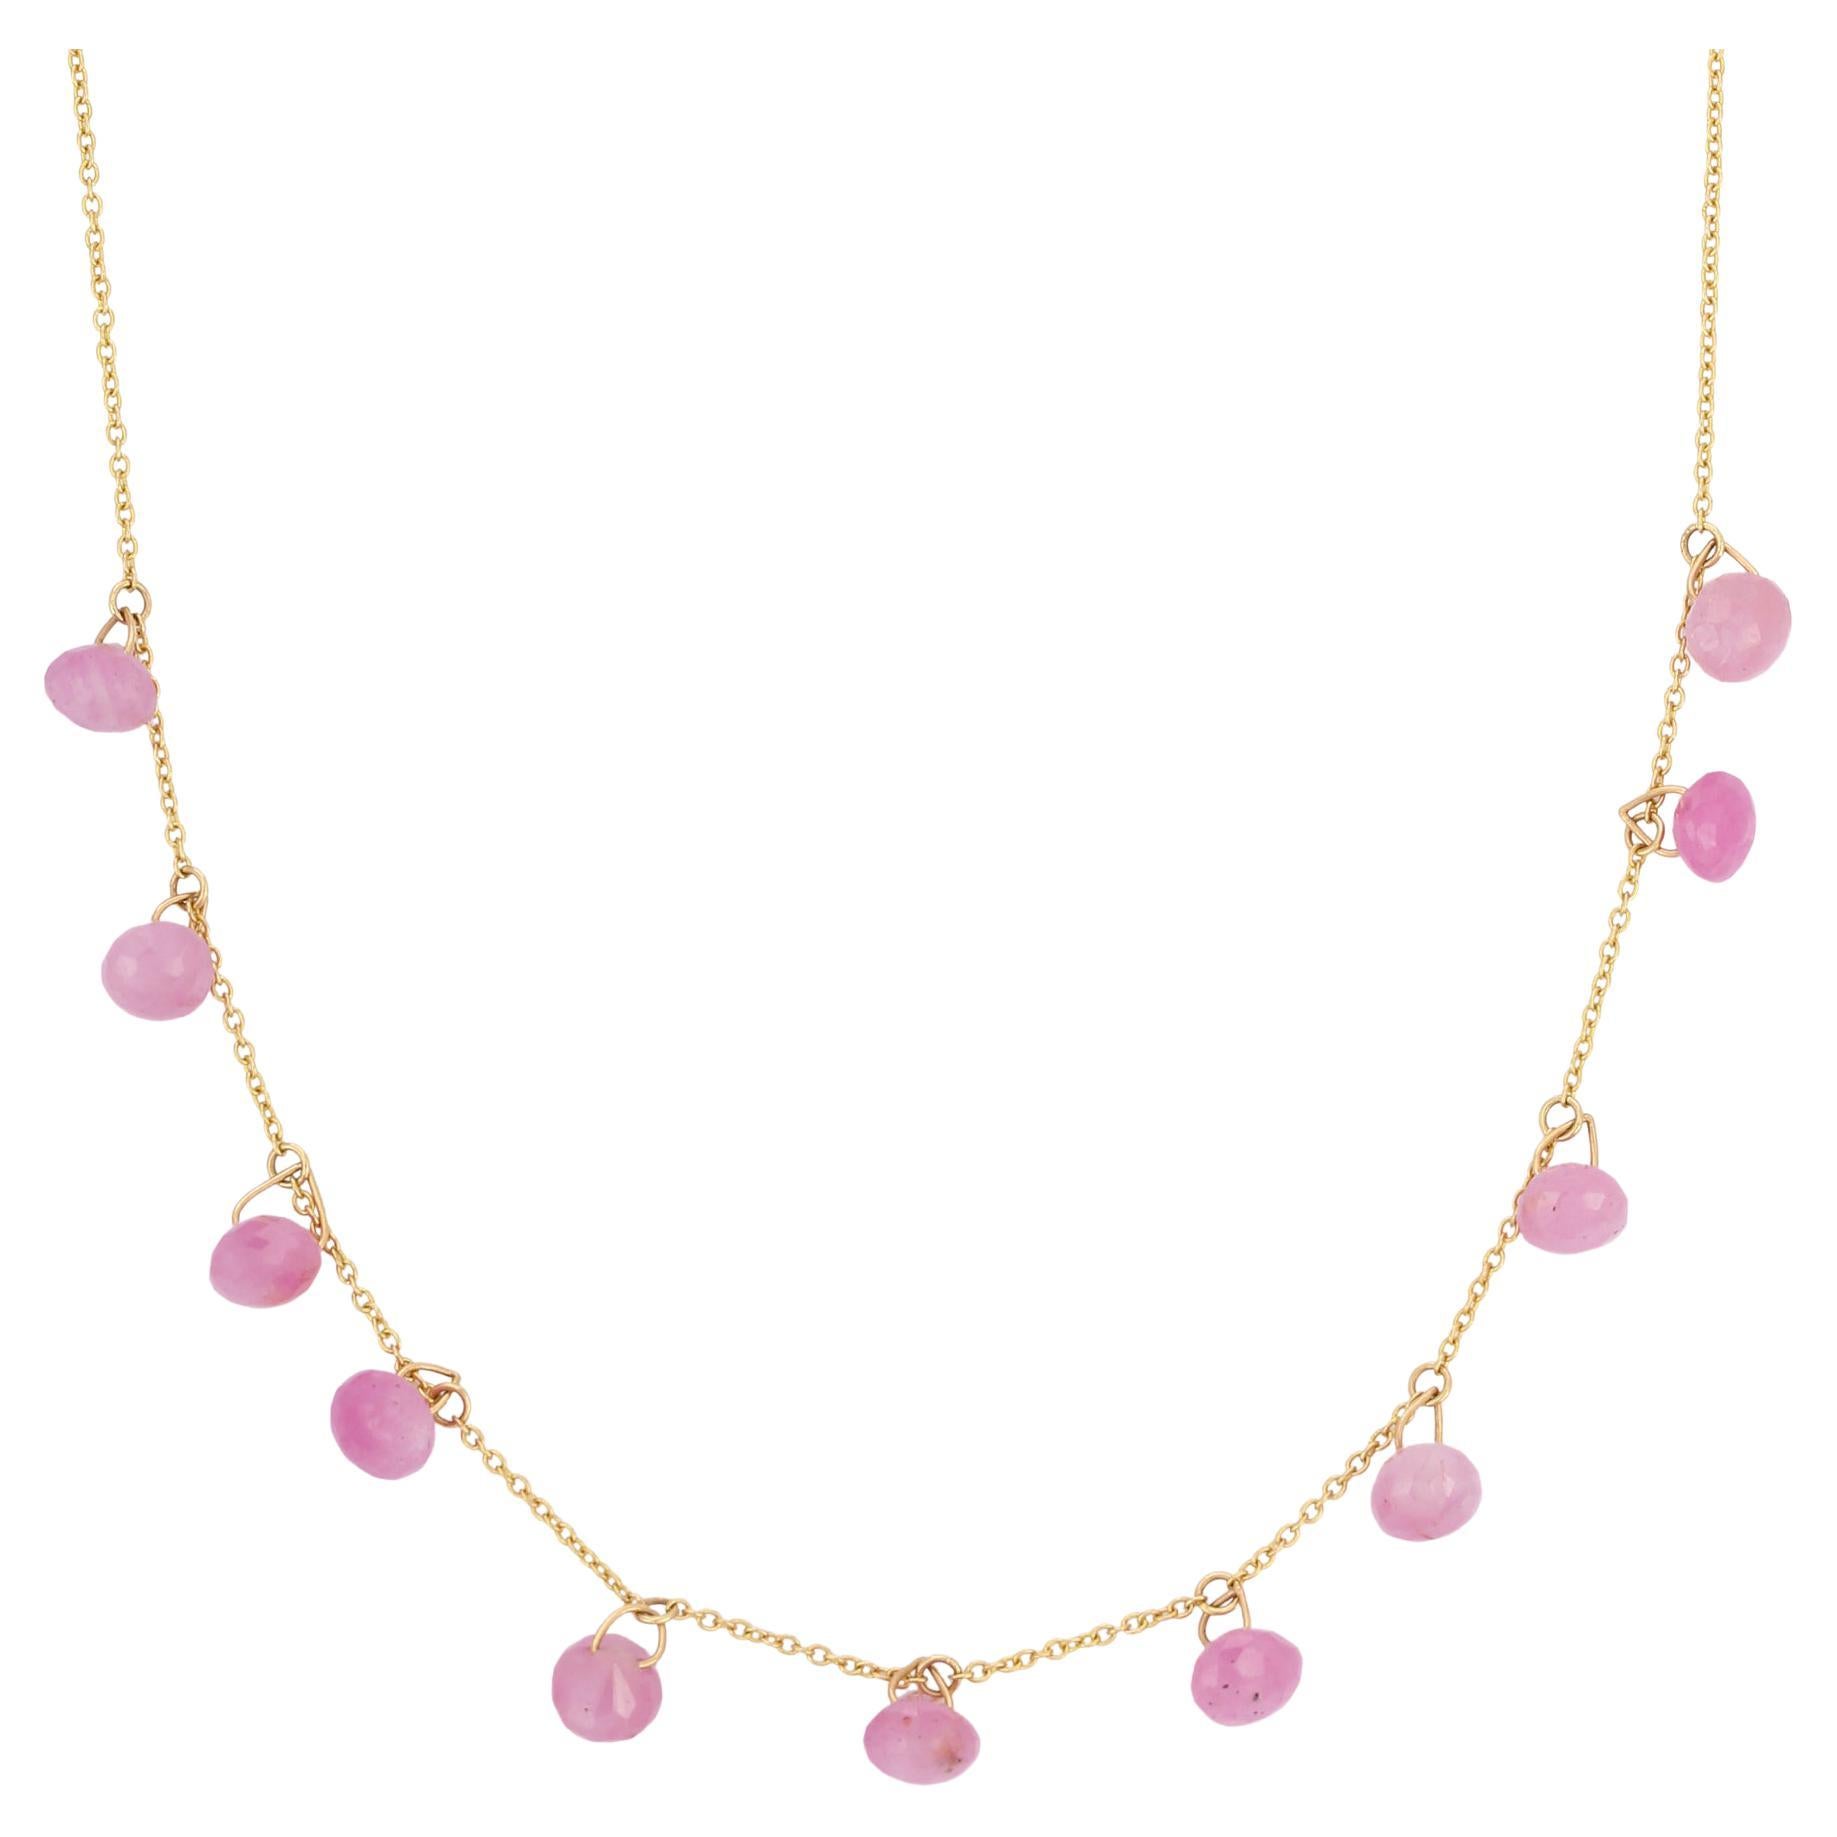 11.5 Carat Pink Sapphire Drop Necklace in 18K Yellow Gold